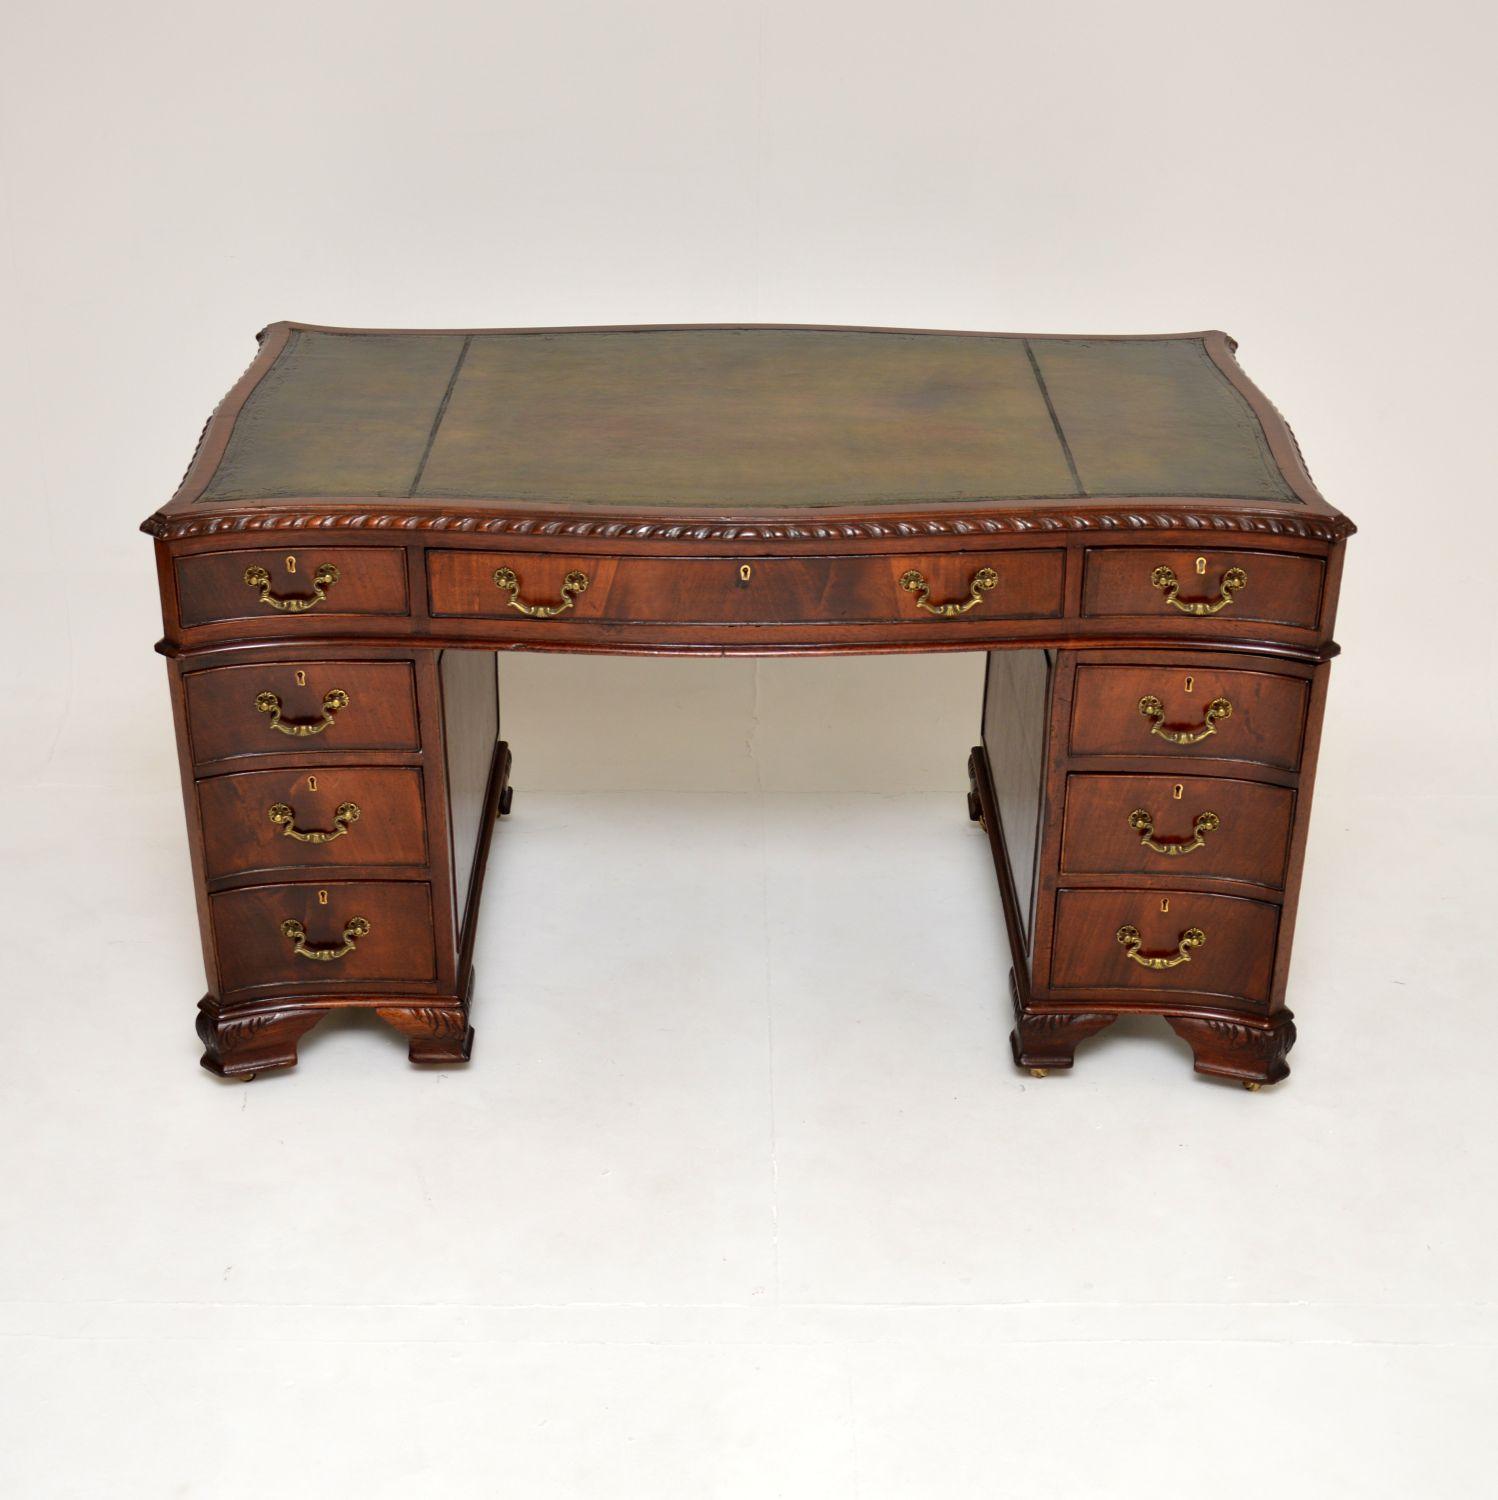 A superb antique leather top pedestal desk in the Chippendale style. This was made in England, it dates from around the 1880-1900 period.

The quality is outstanding, this has a beautiful and useful design. The top has serpentine and gadrooned edges